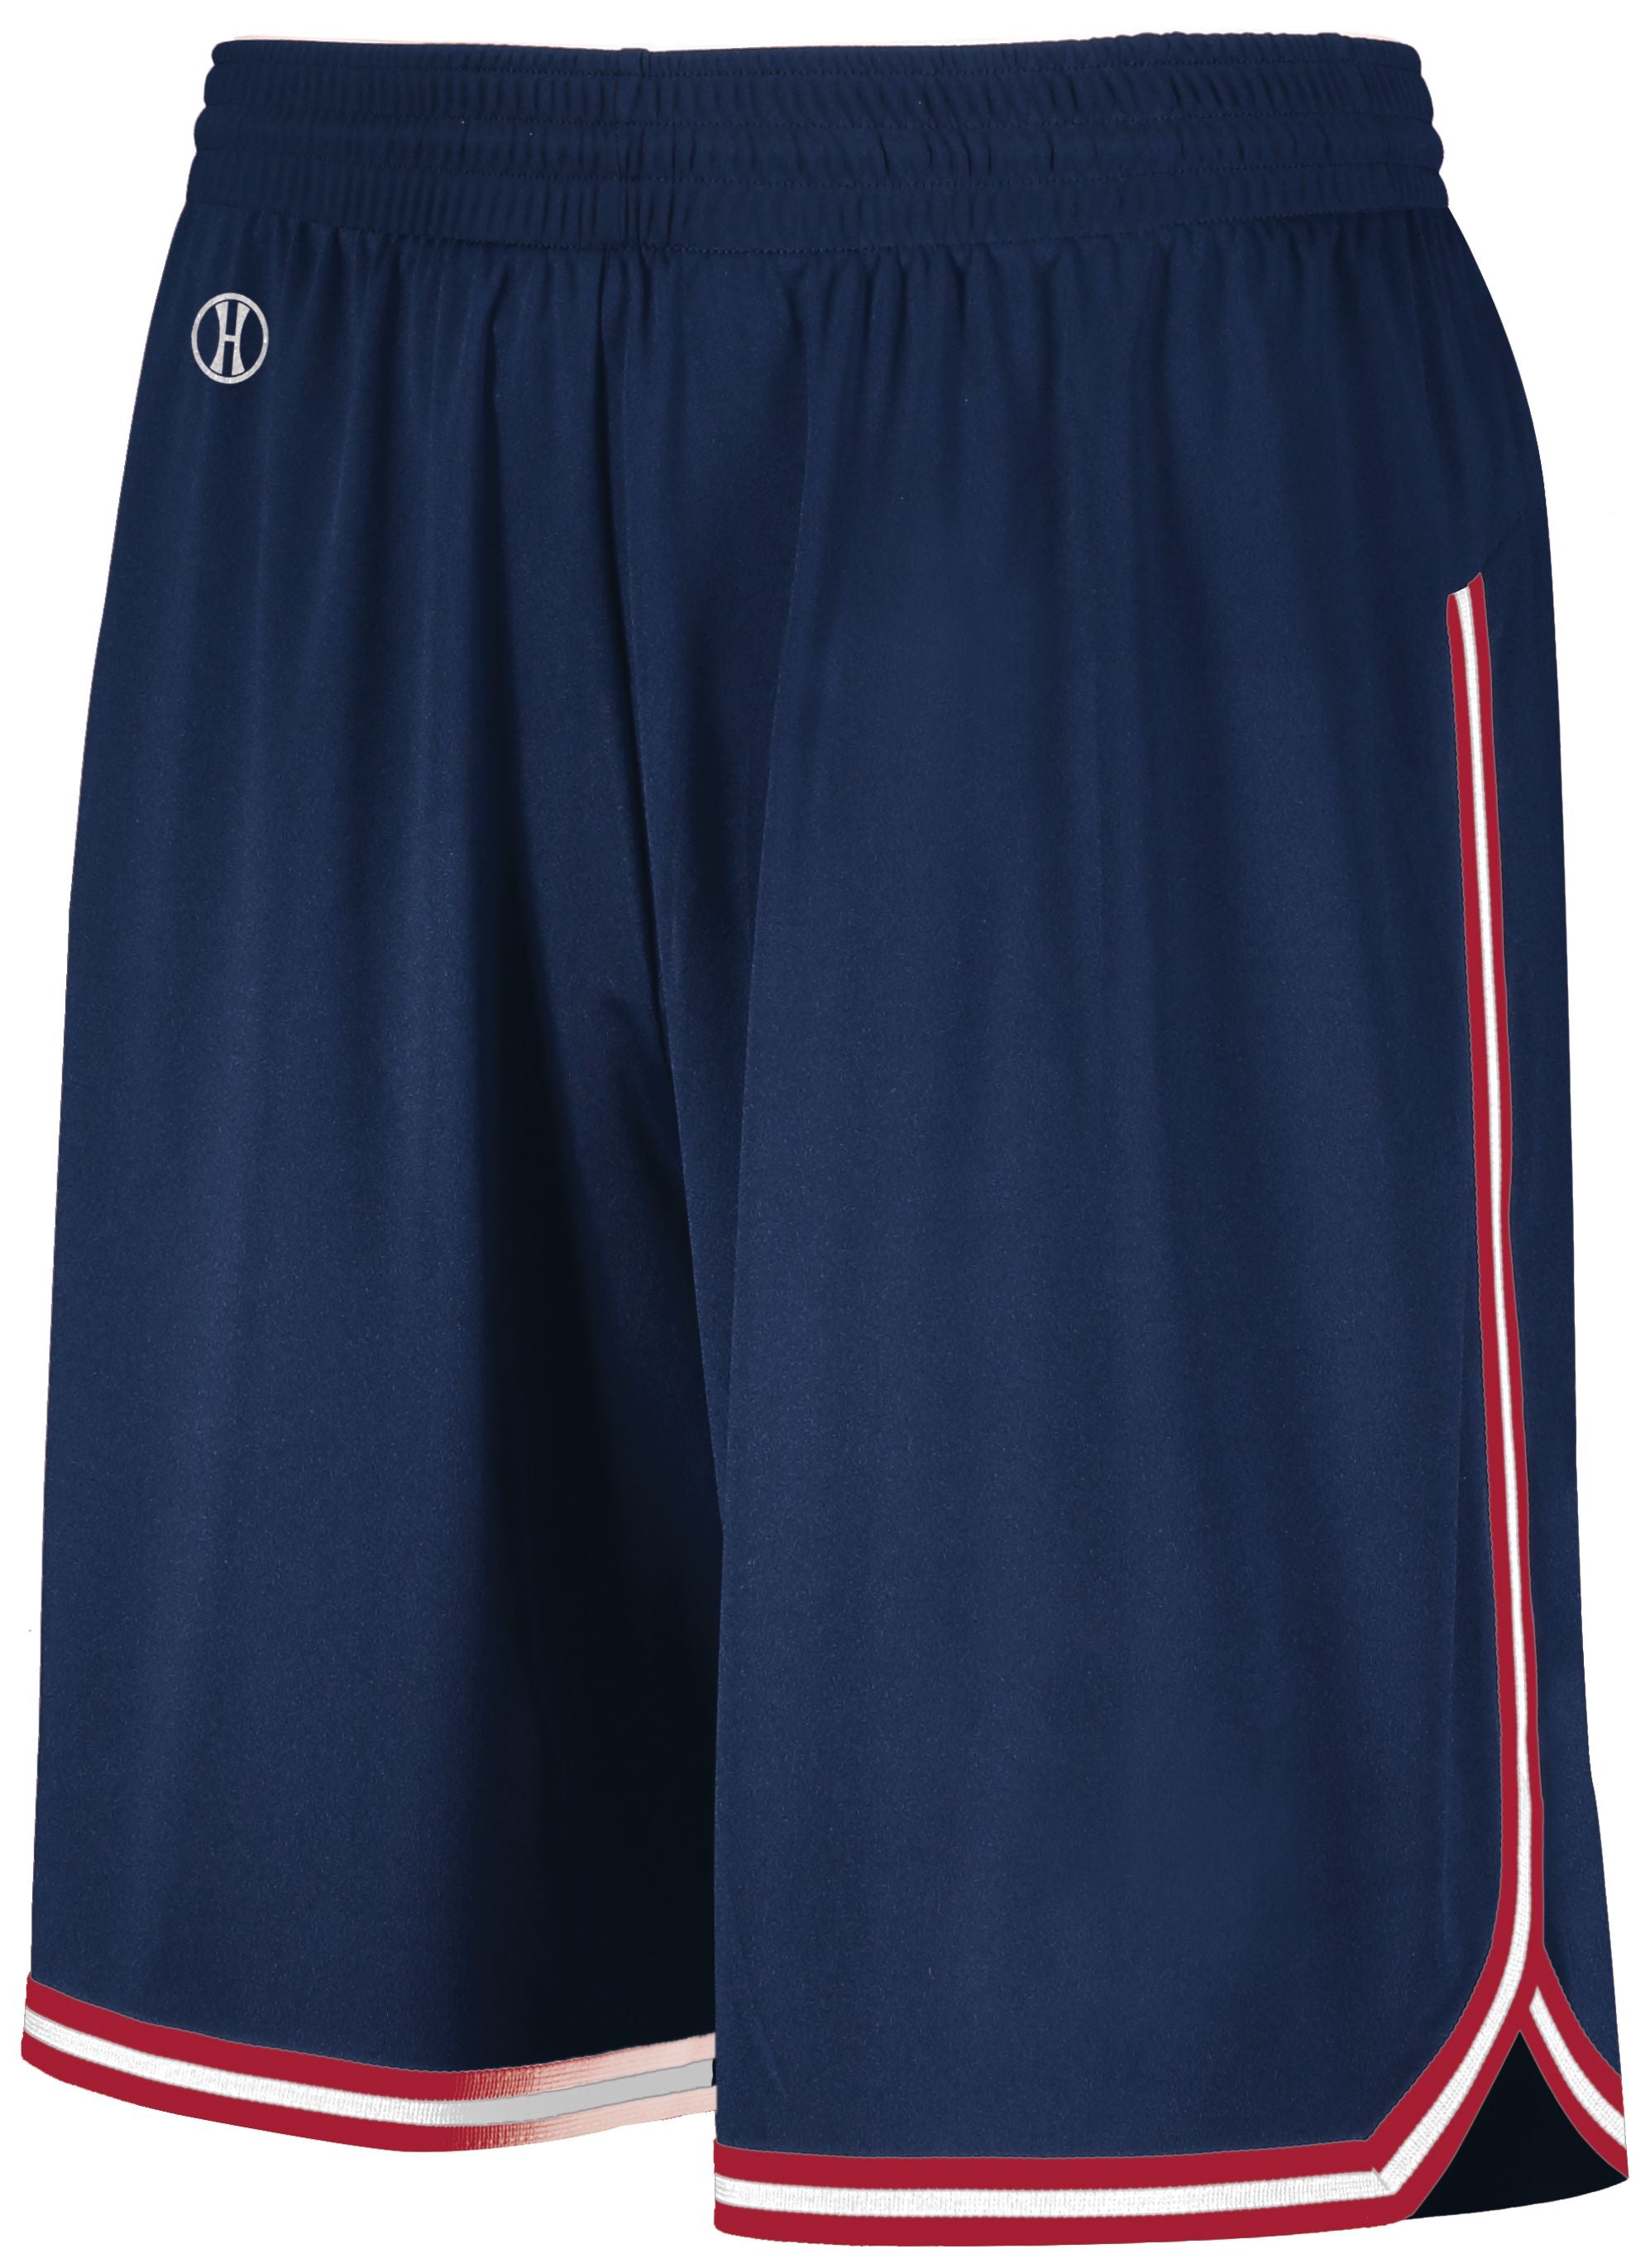 Holloway Retro Basketball Shorts in Navy/Scarlet/White  -Part of the Adult, Adult-Shorts, Basketball, Holloway, All-Sports, All-Sports-1 product lines at KanaleyCreations.com